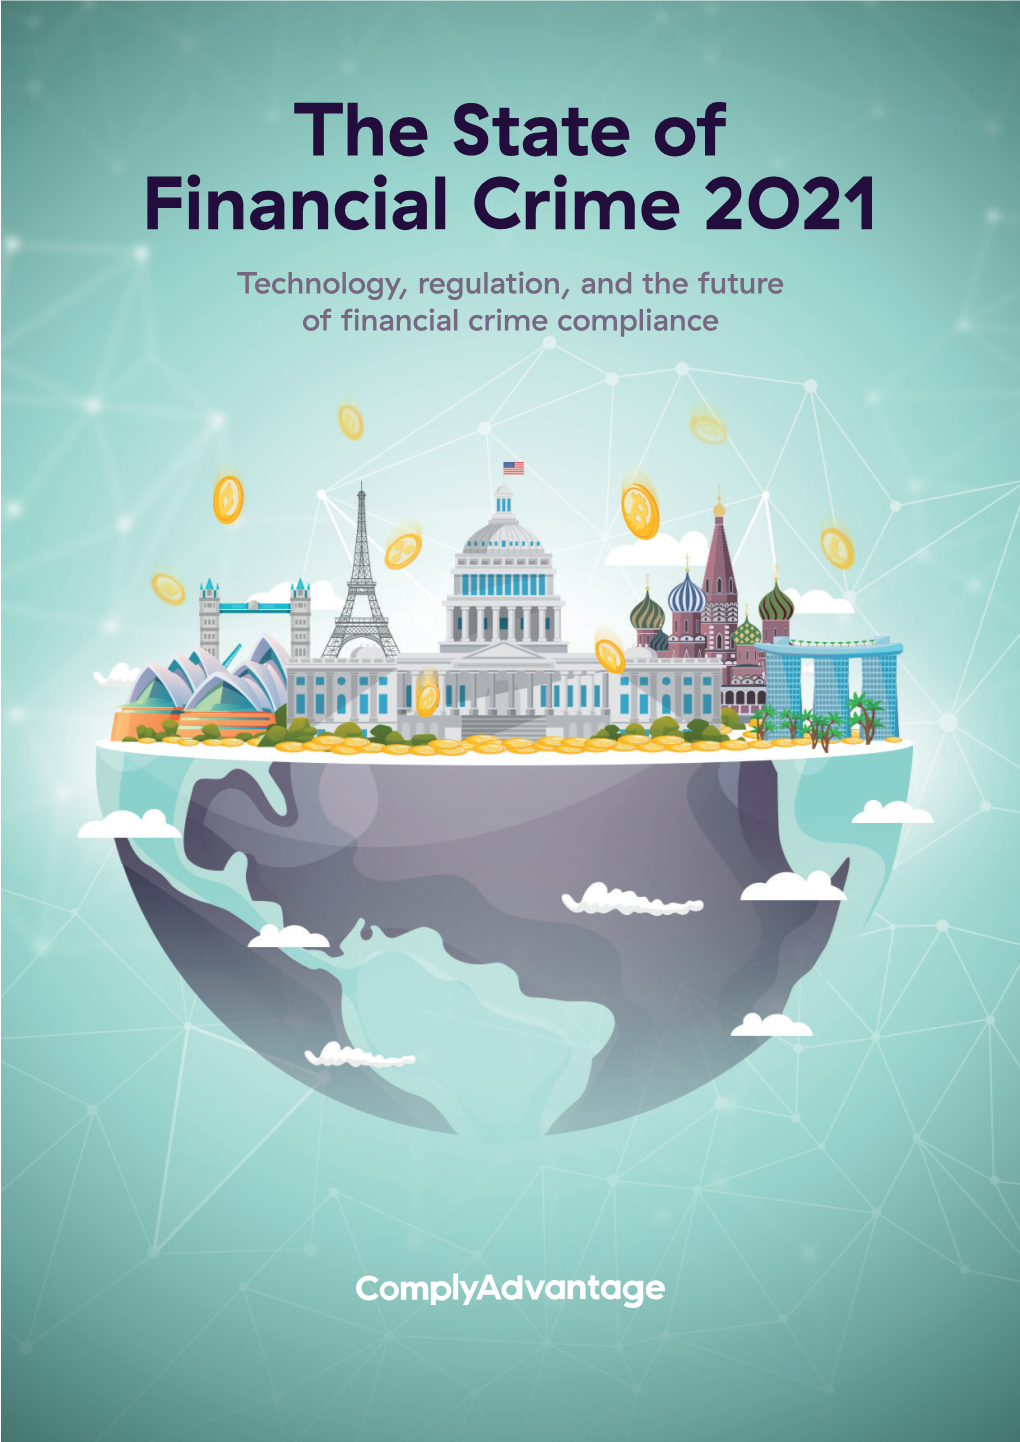 The State of Financial Crime 2021 the State of Financial Crime 2021 Technology, Regulation, and the Future of Financial Crime Compliance